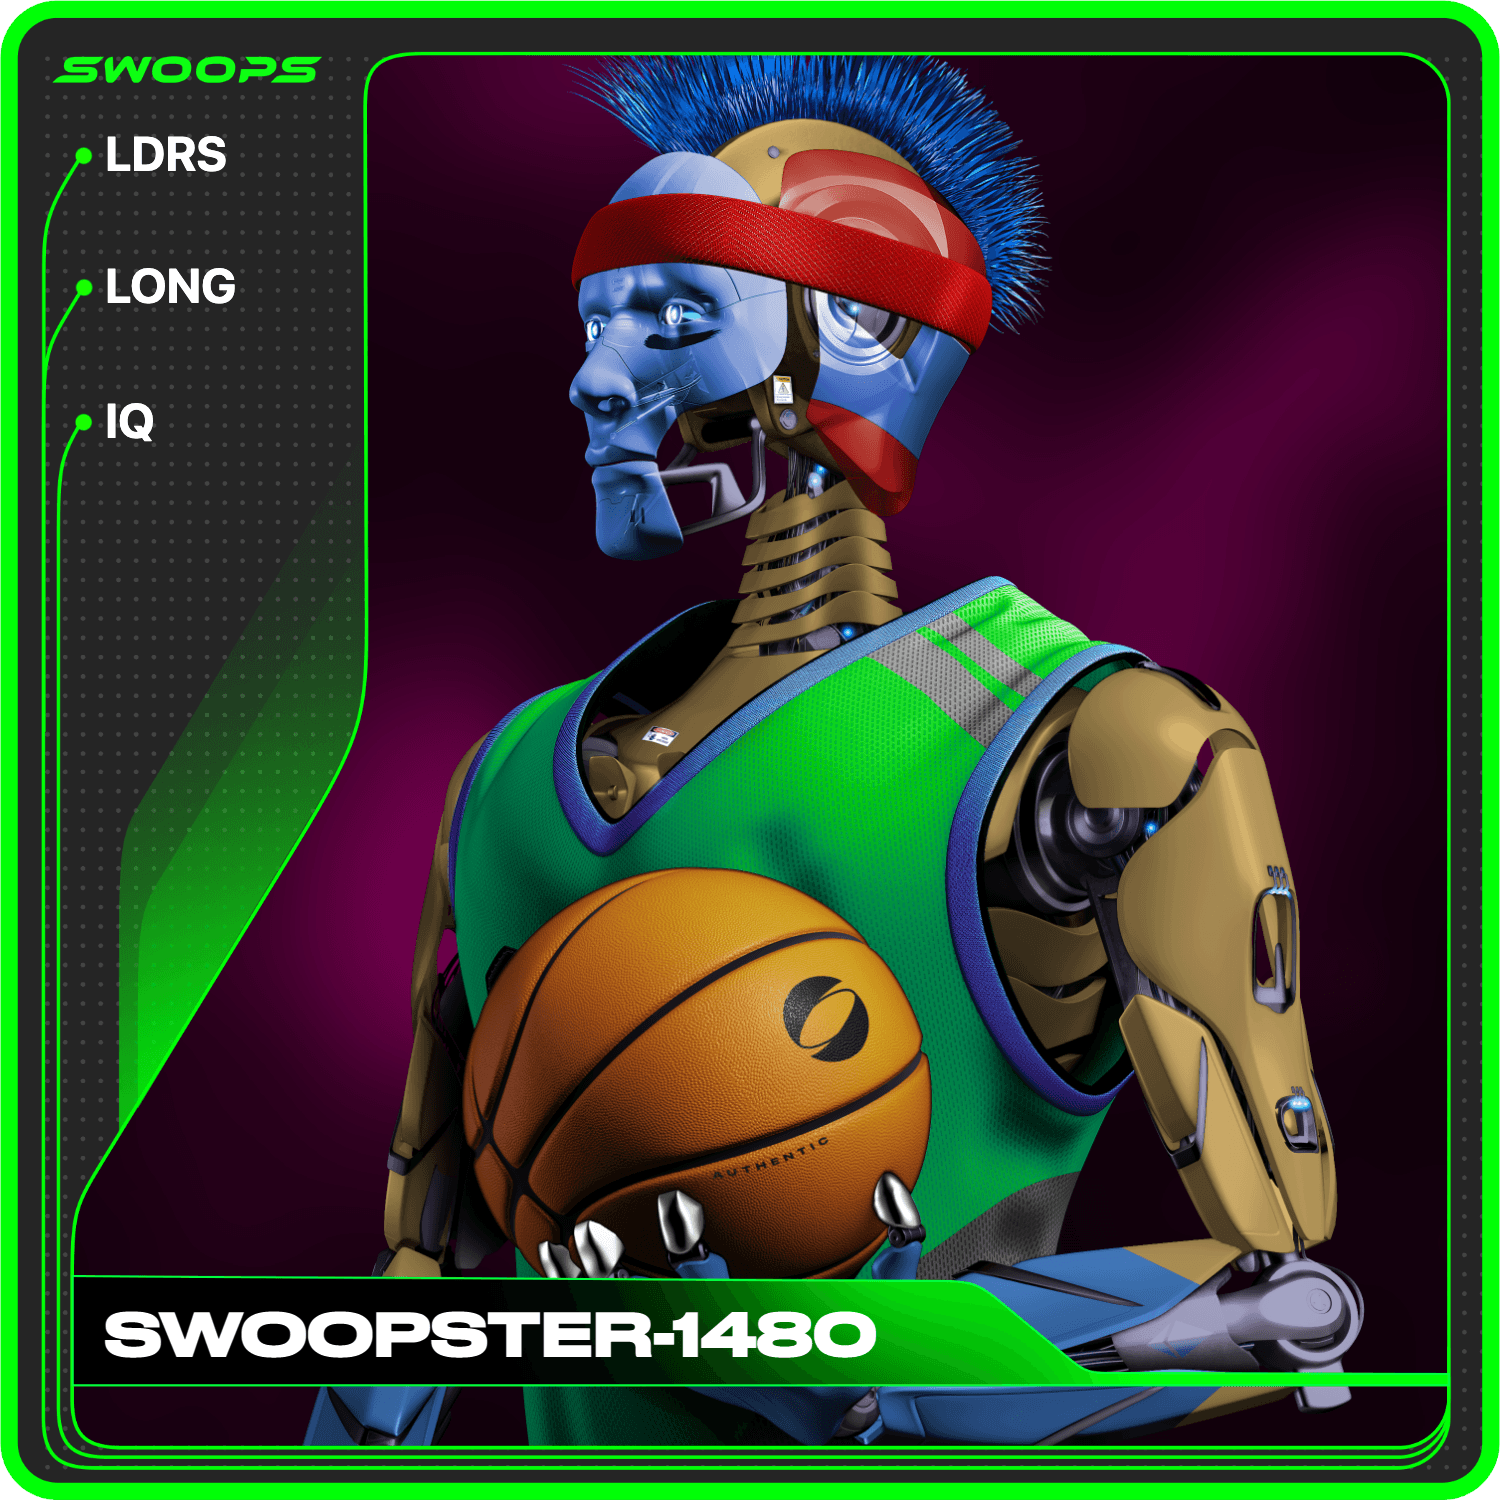 SWOOPSTER-1480